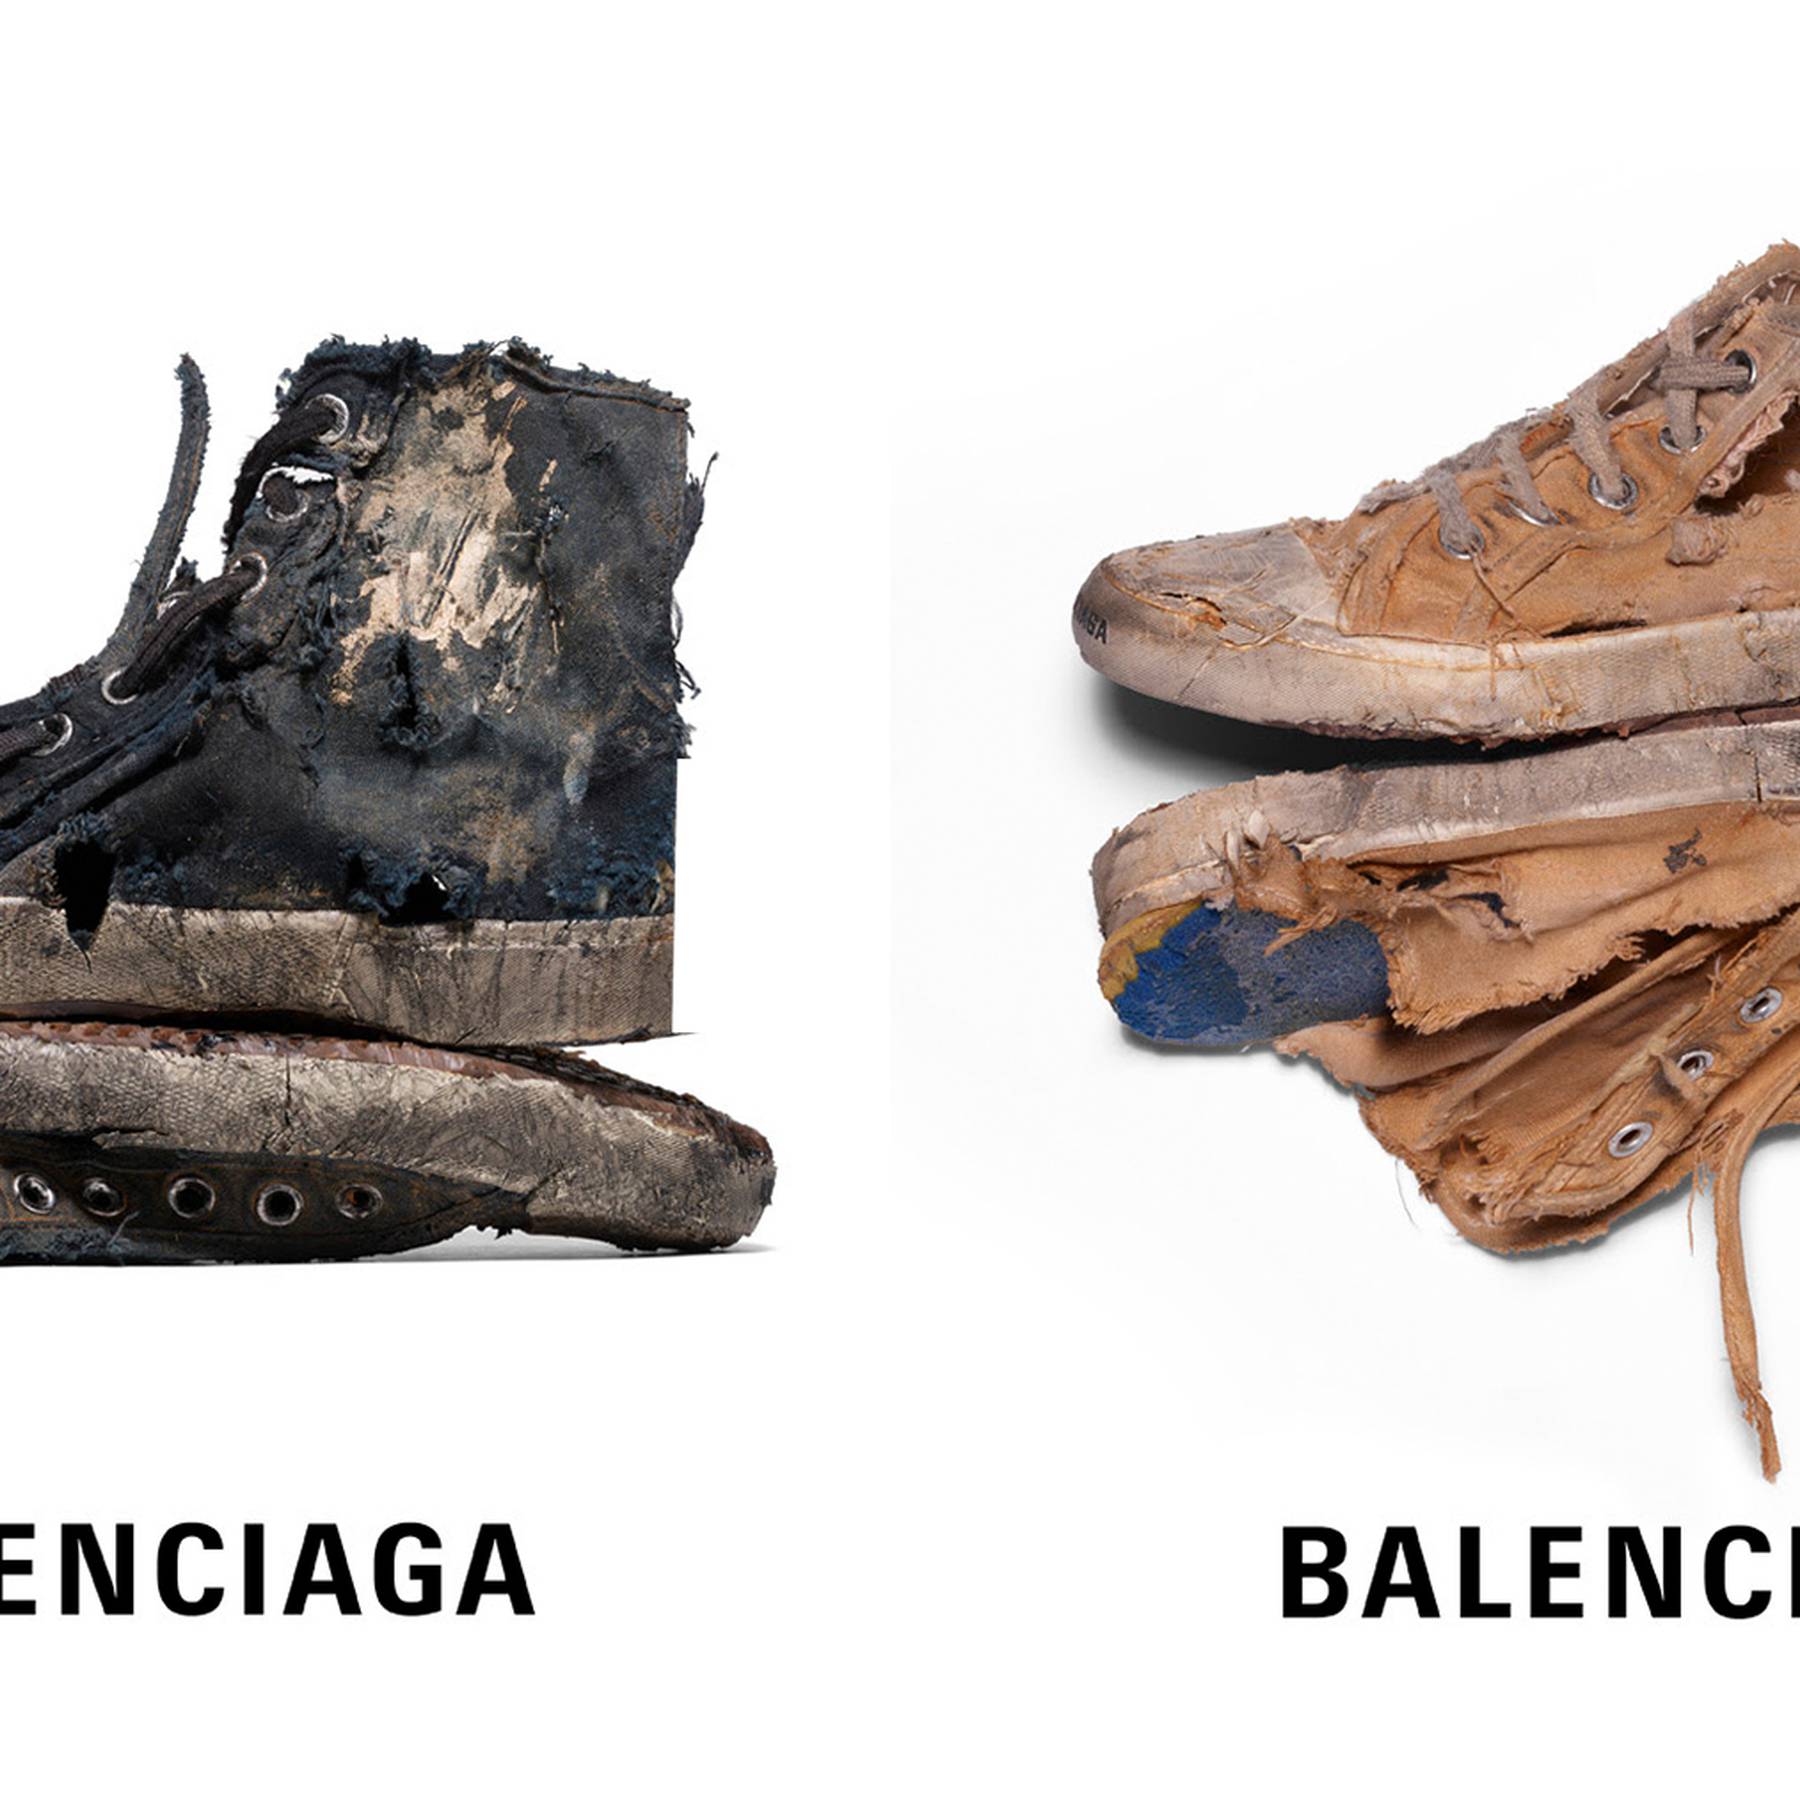 Balenciaga Selling Destroyed Sneakers For $1,850 CNN Style | vlr.eng.br